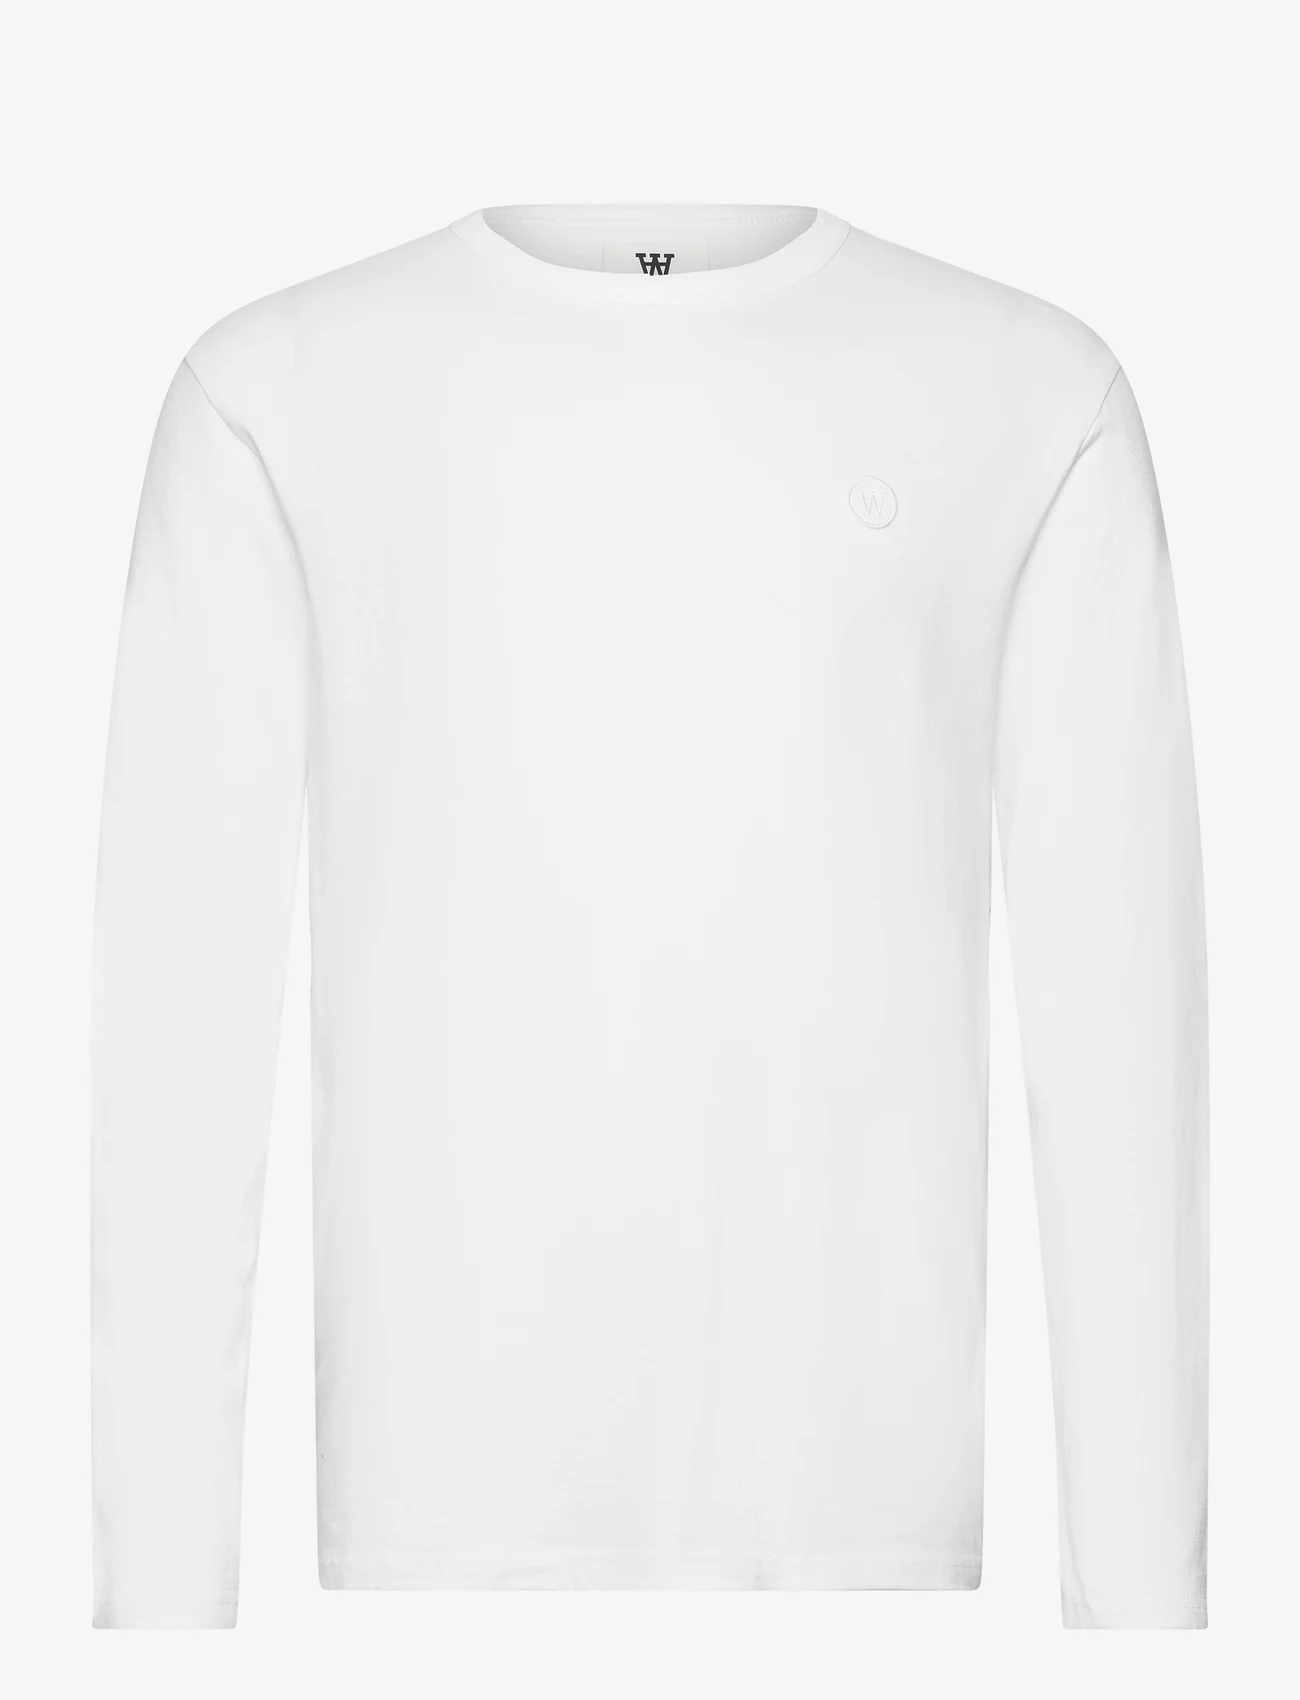 Double A by Wood Wood - Mel long sleeve GOTS - langærmede t-shirts - white/white - 0